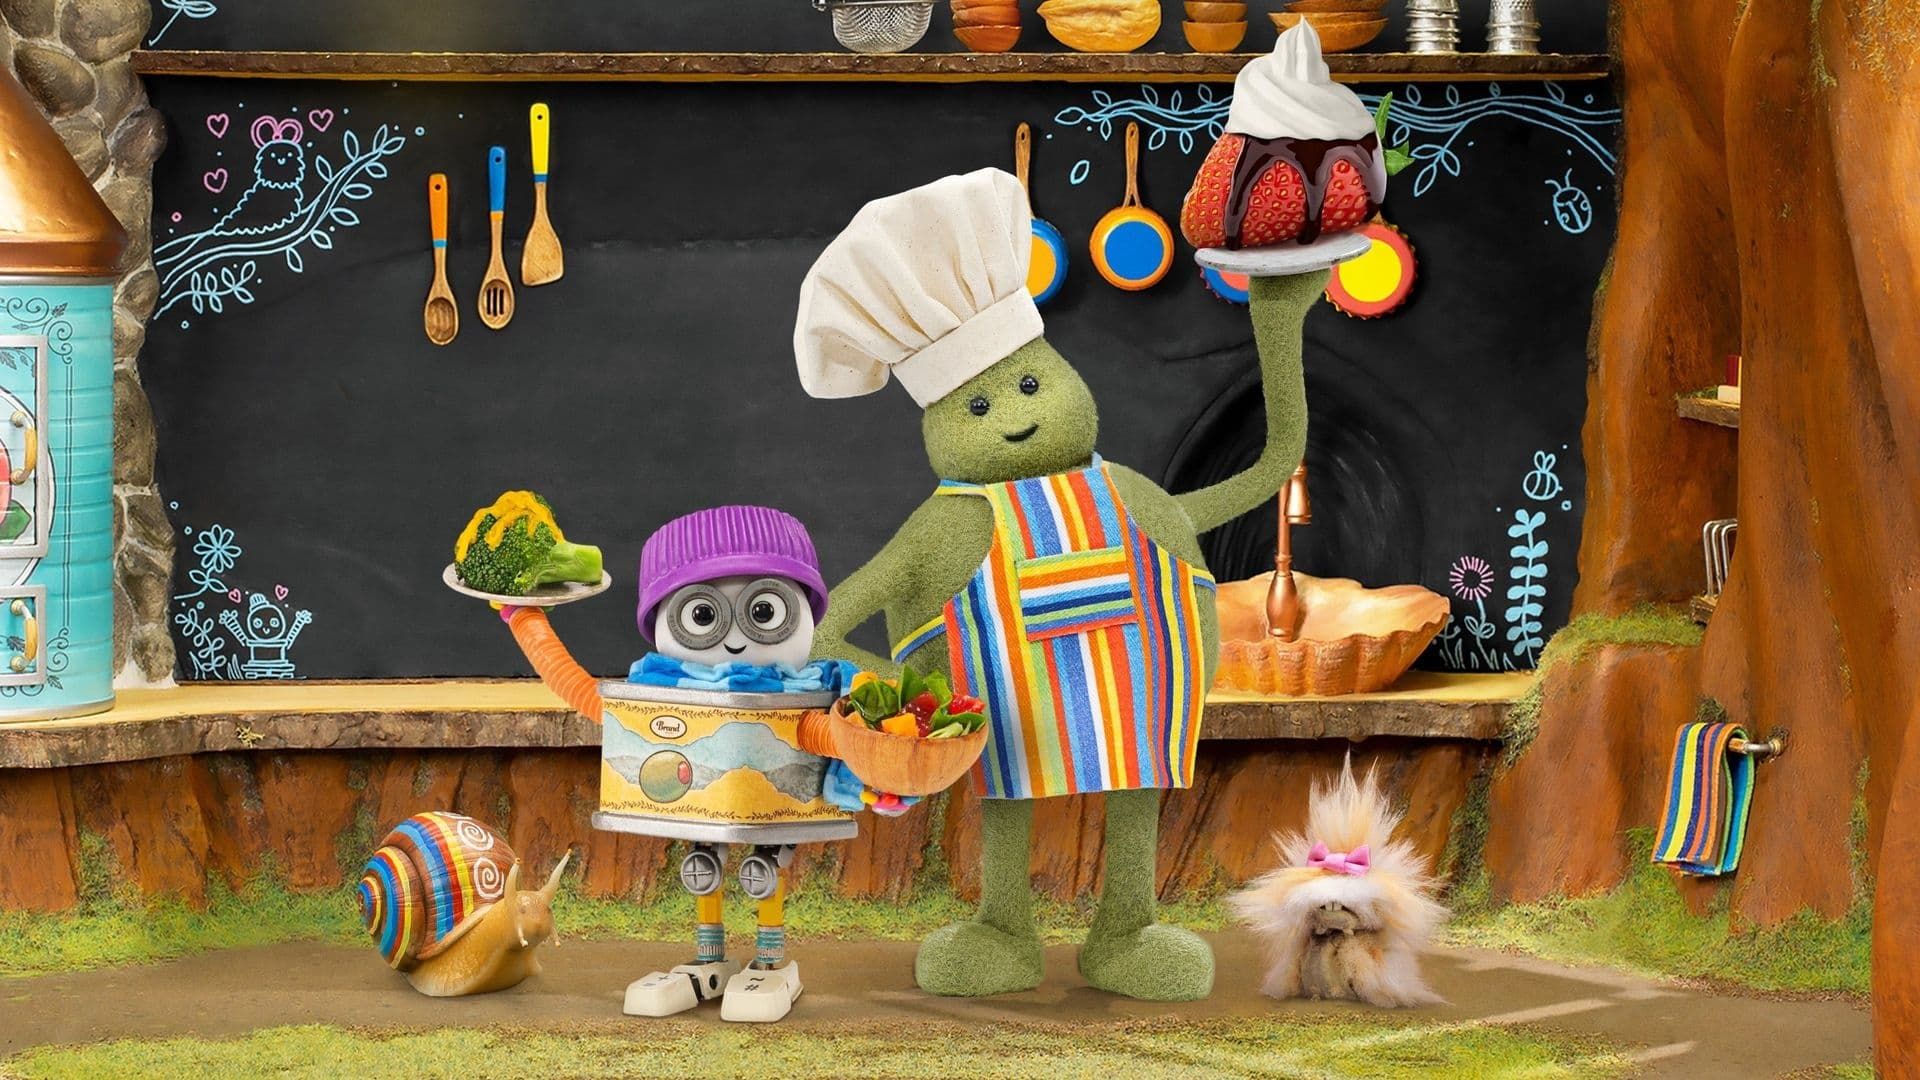 The Tiny Chef Show background